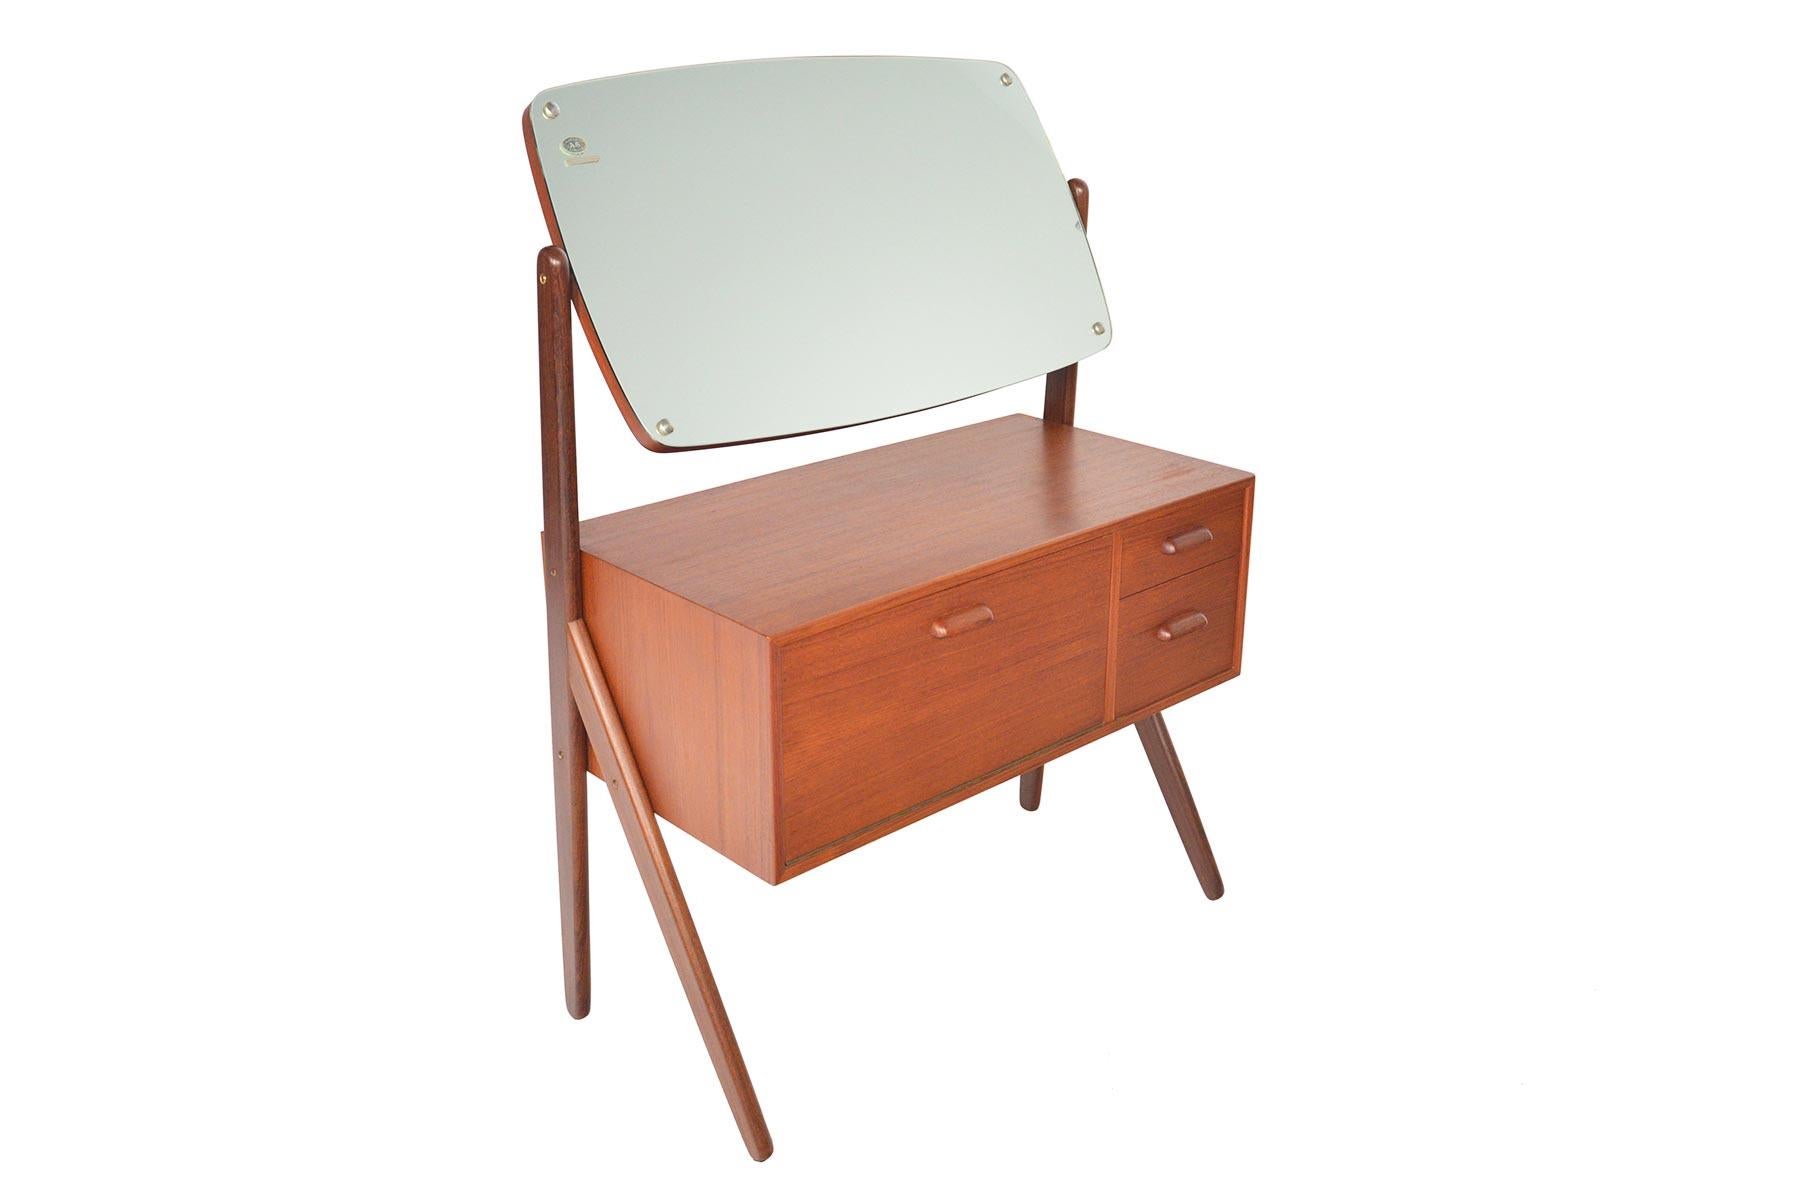 This gorgeous Danish modern teak V-legged vanity Model 593 by Ølholm Mobelfabrik offers wonderful lines in a small footprint! Featuring an articulating vanity mirror, this piece exceptional storage with two drawers and a laminate lined cubby. In